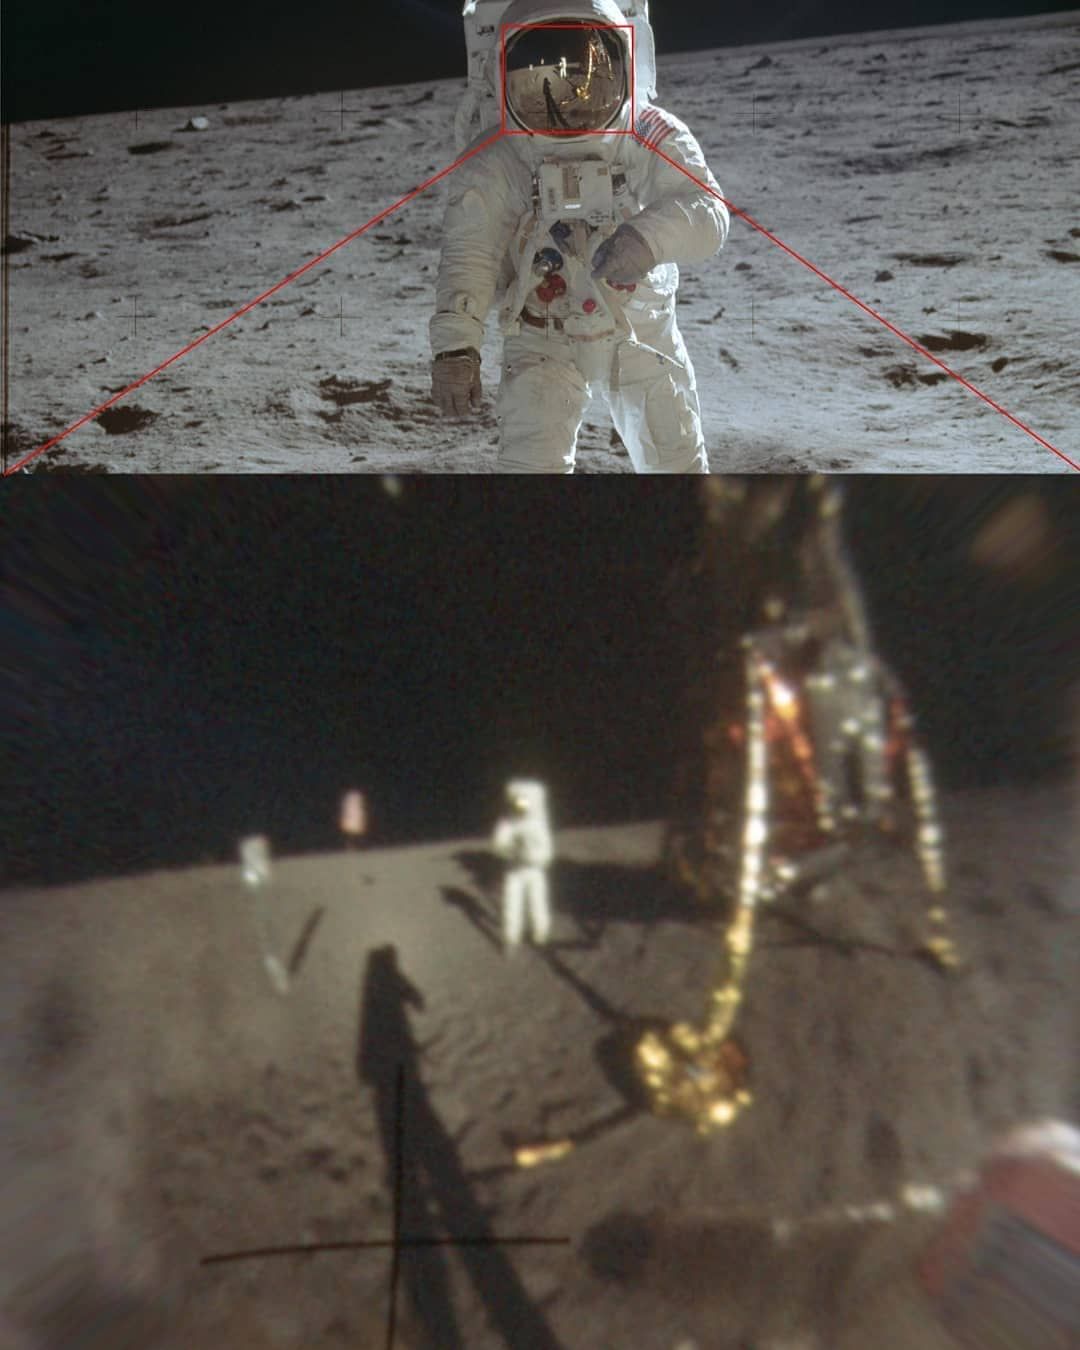 close look at the famous Neil Armstrong photo